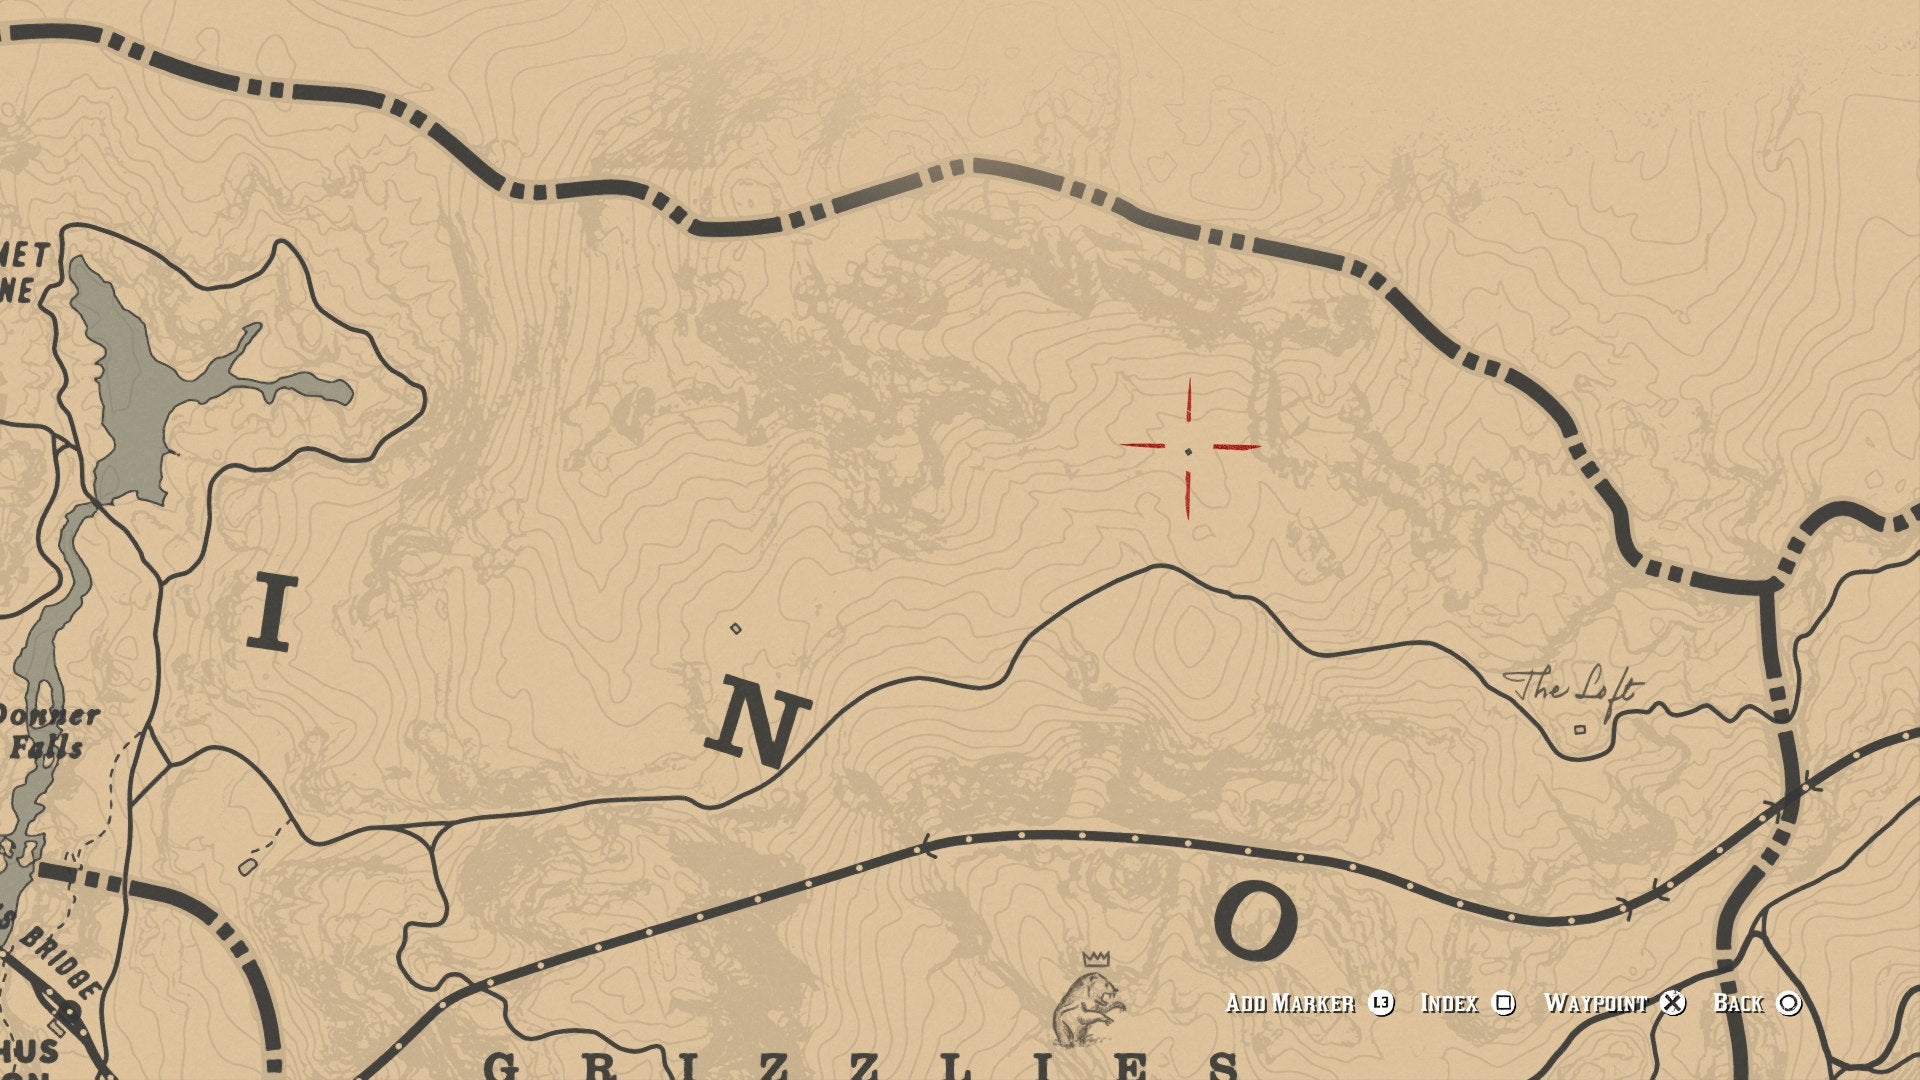 Dead Redemption Shack Locations | VG247